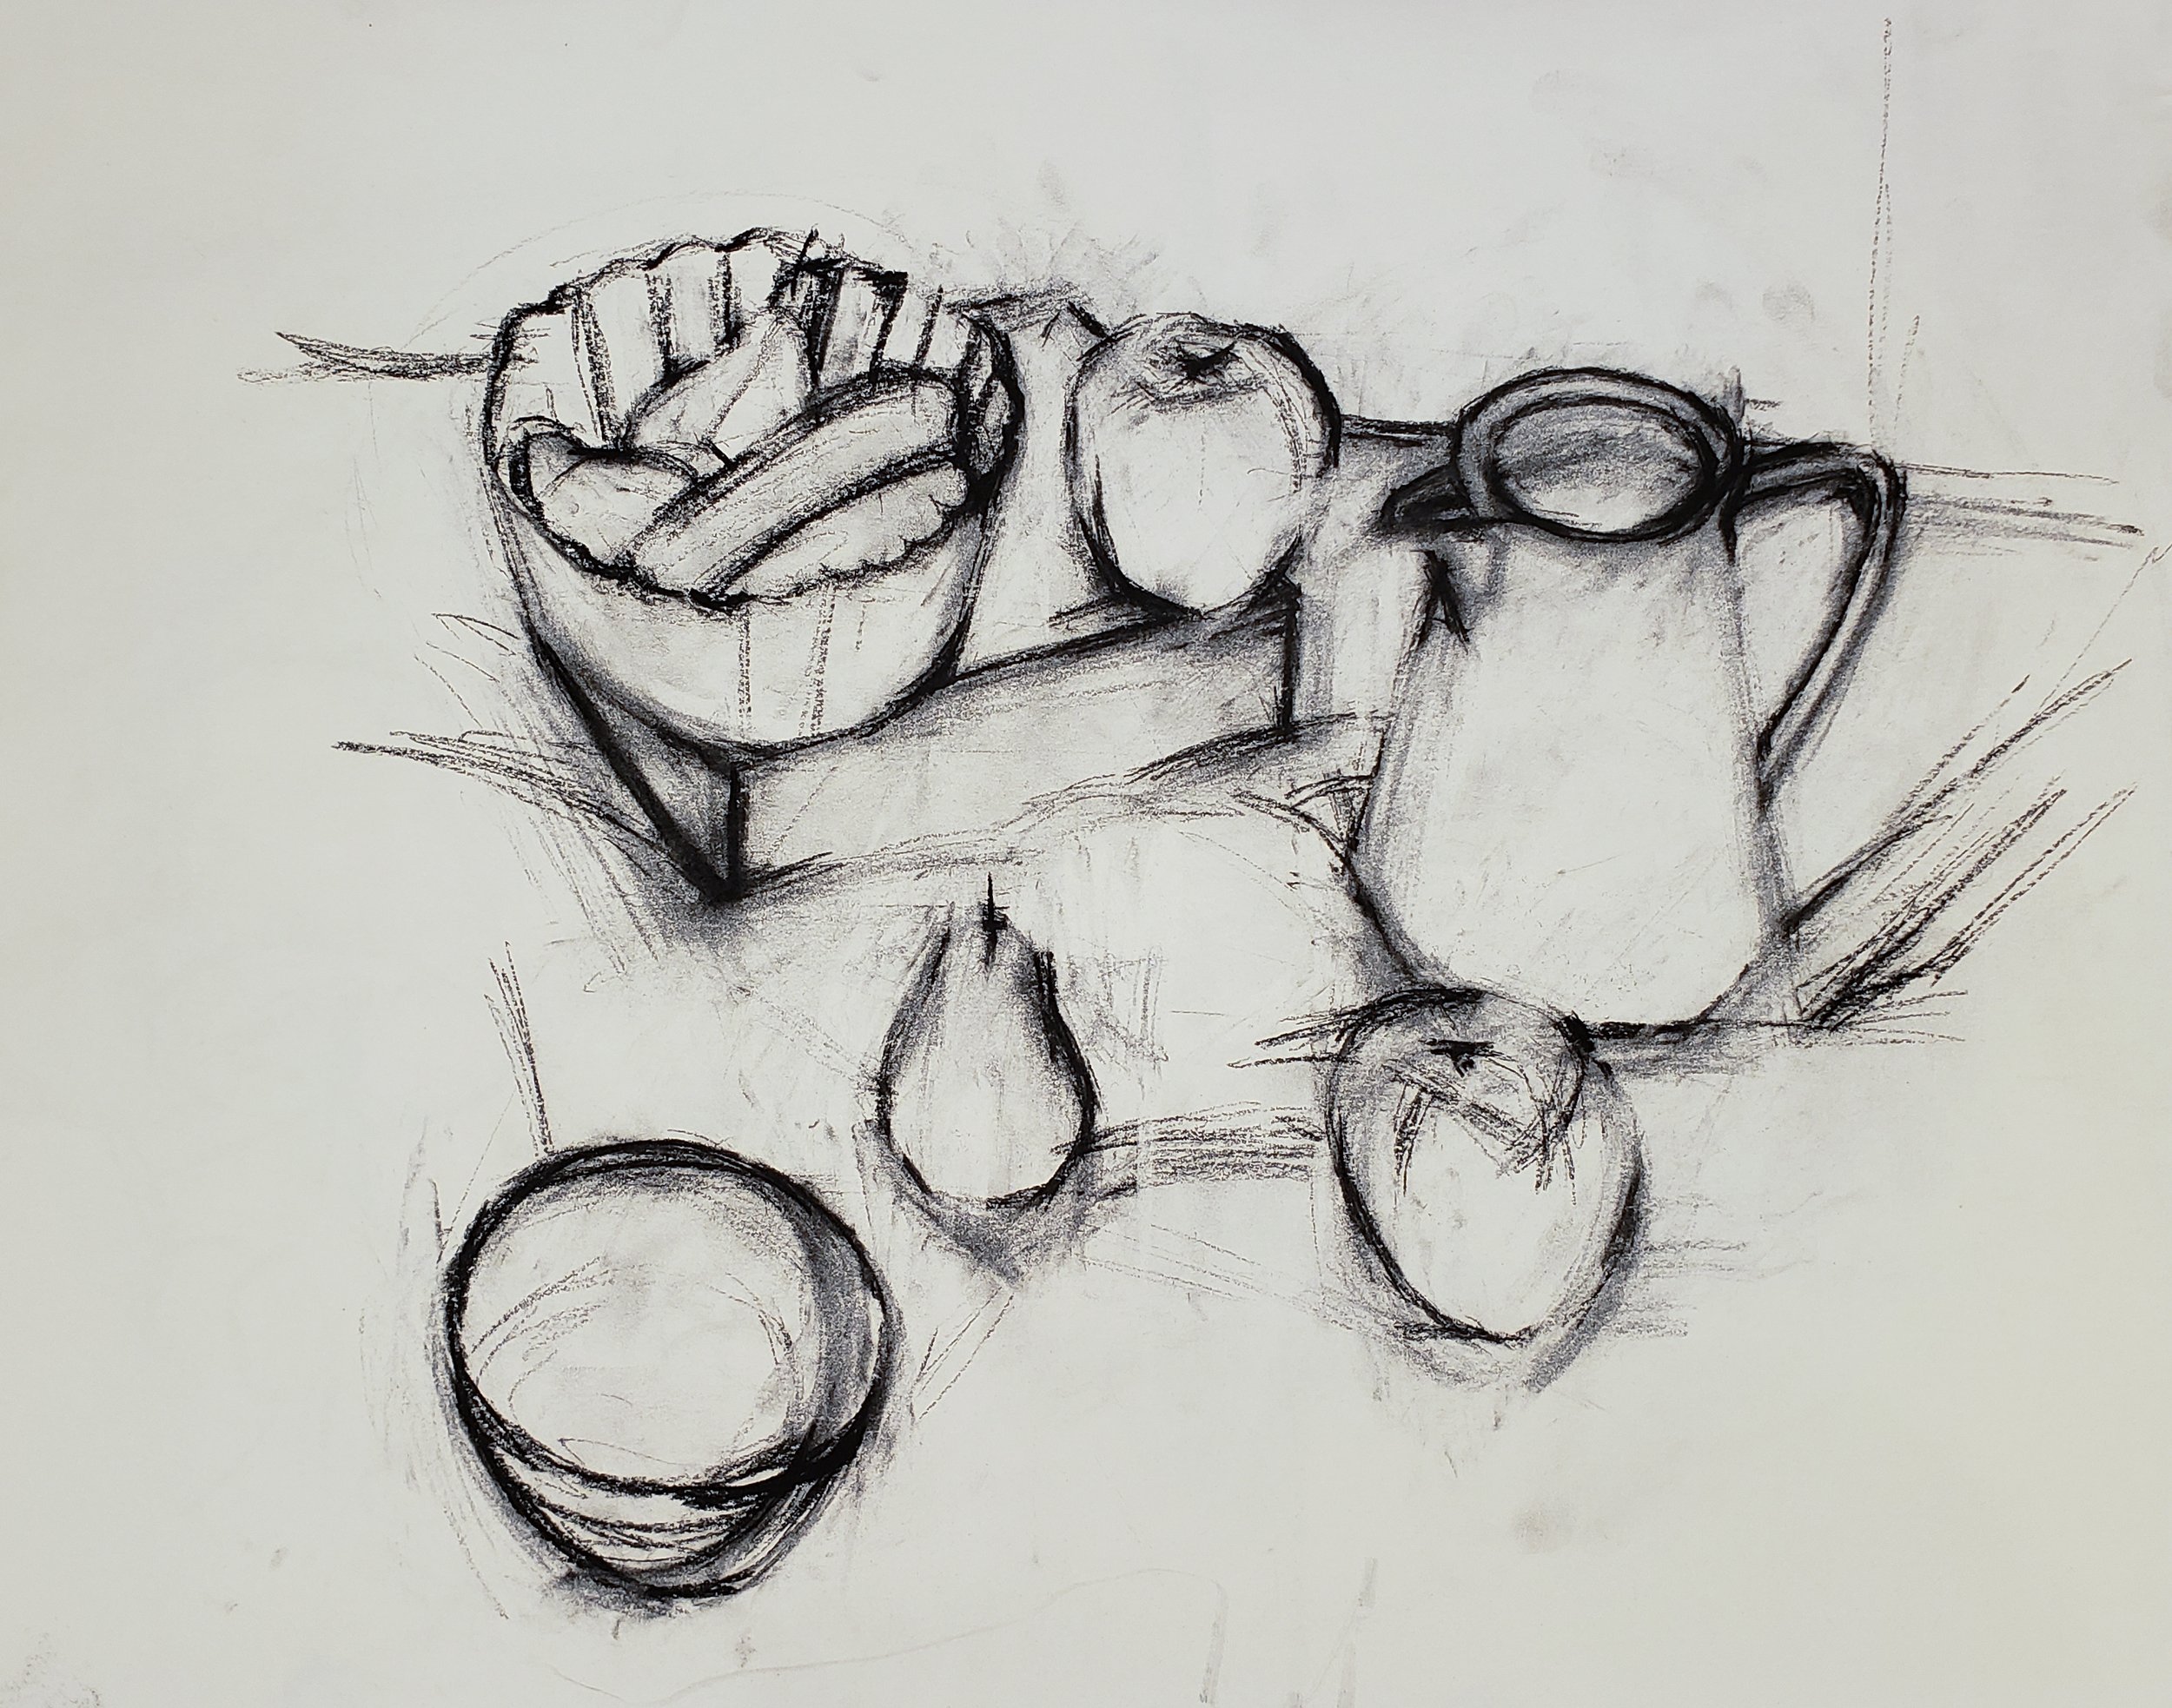   Still Life Study with Pitcher and Mold , undated, charcoal/paper unmounted, 18 x 24 in, $350 